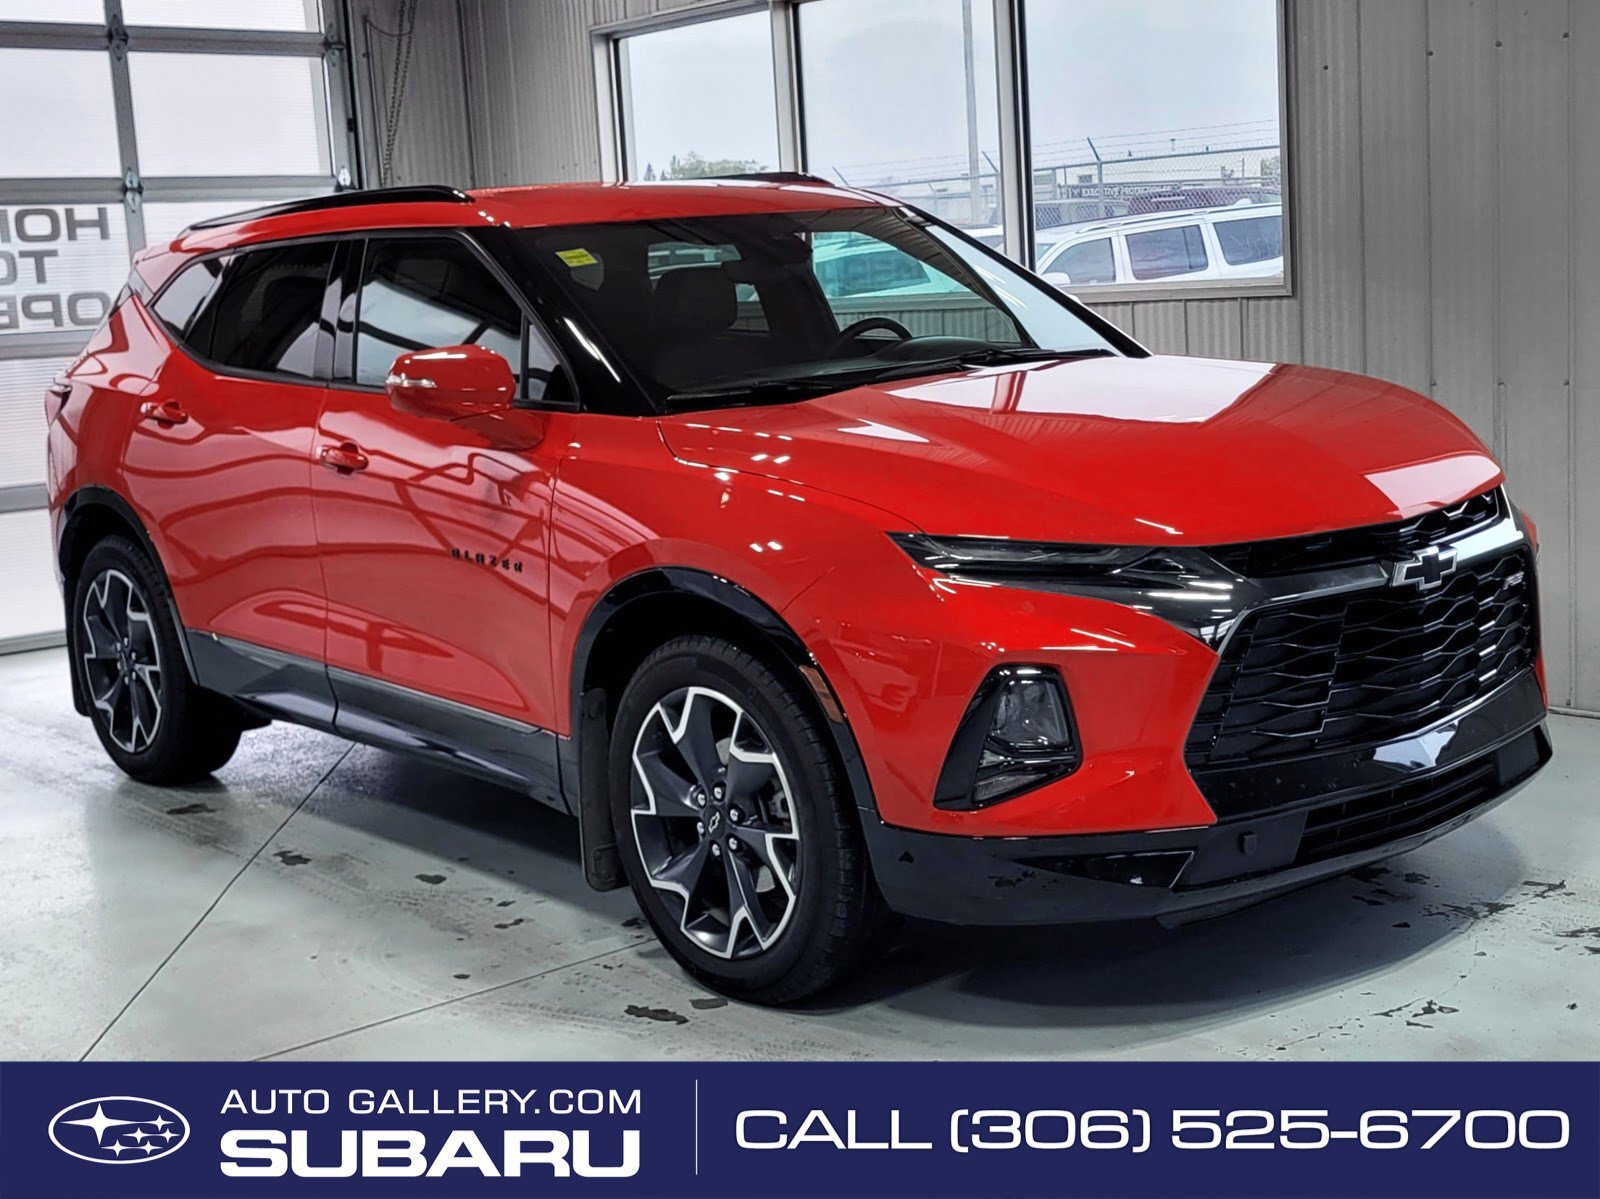 2022 Chevrolet Blazer RS AWD | 308 HP | BOSE AUDIO | HEAT/COOL LEATHER